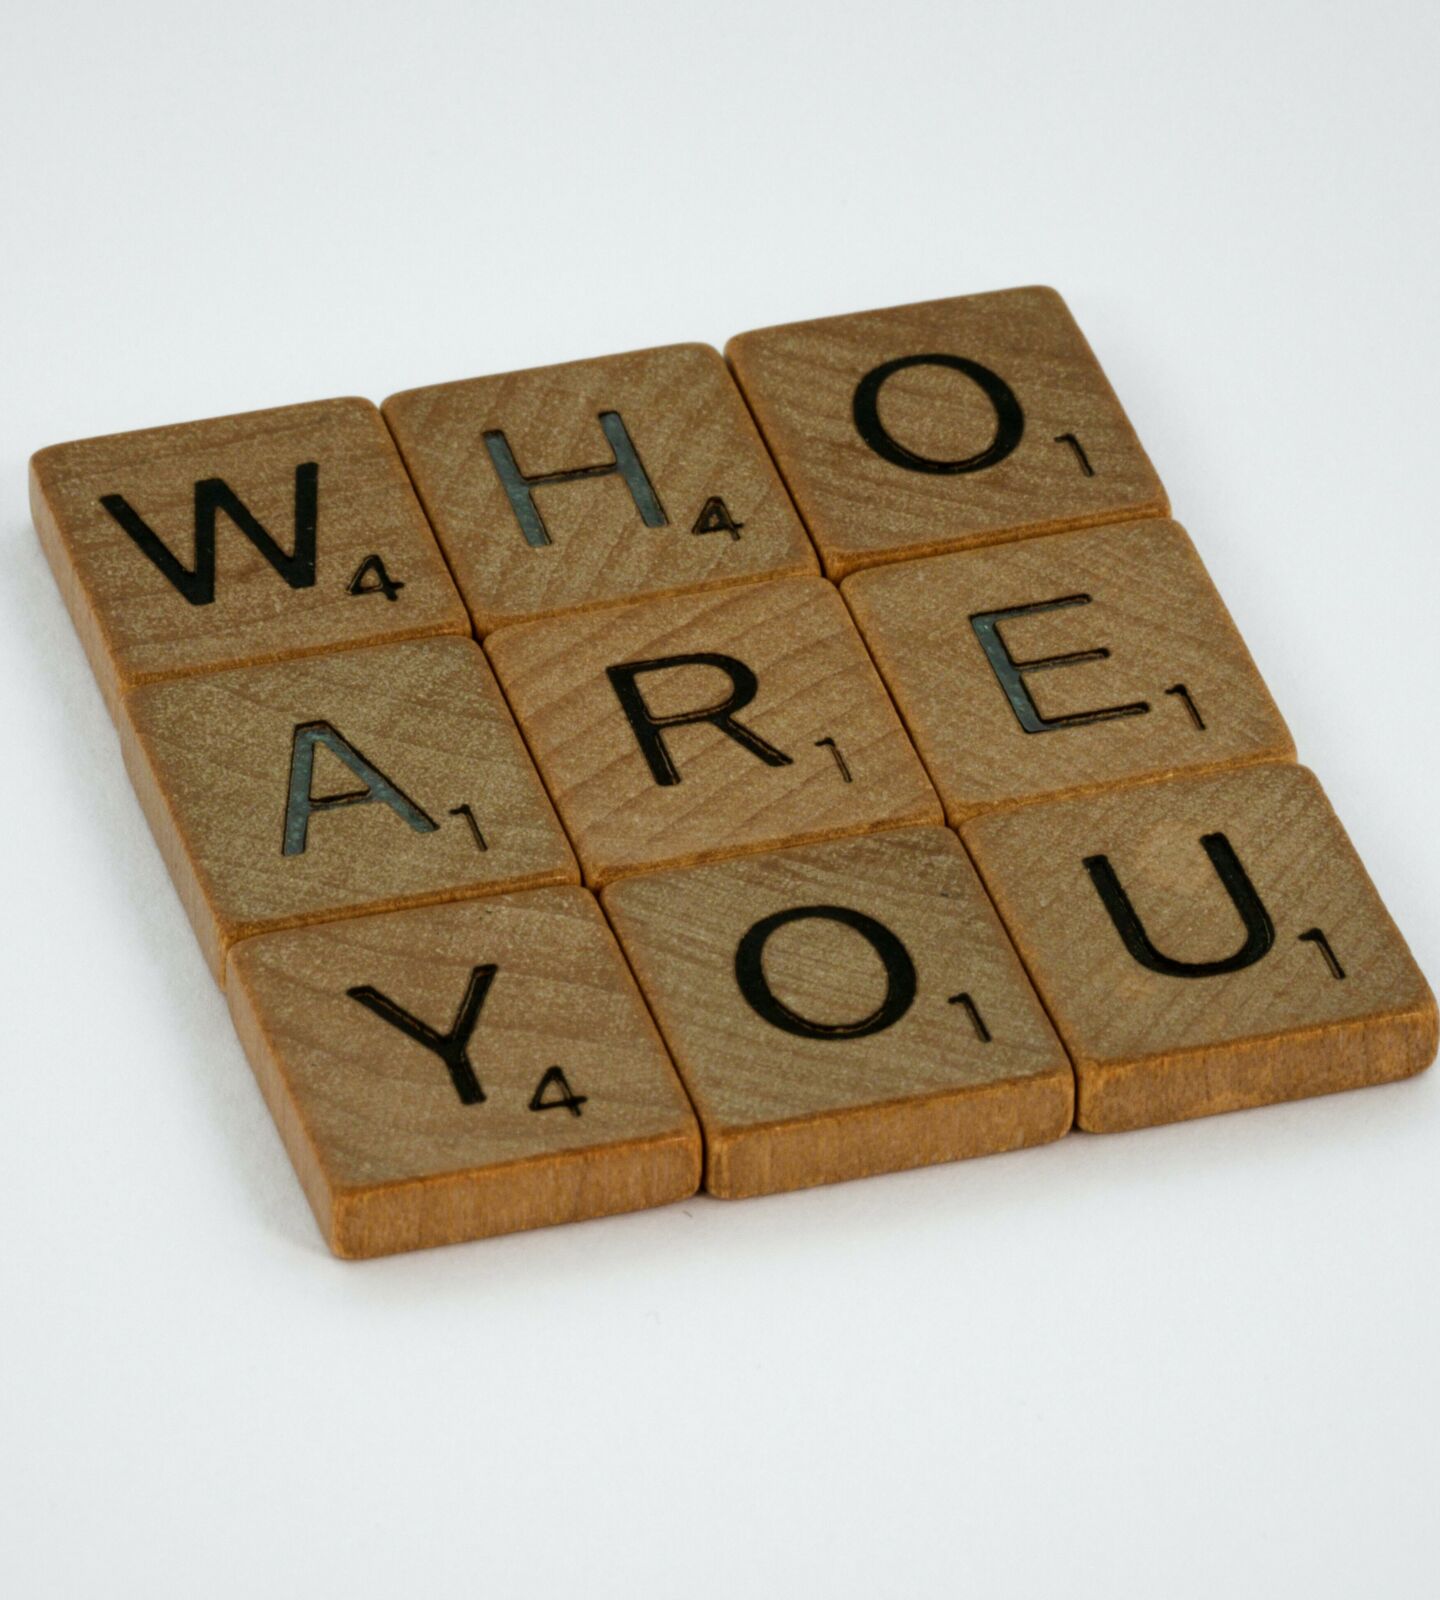 Tiles from the game, Scrabble. They spell Who Are You and are arranged in a 3x3 square.